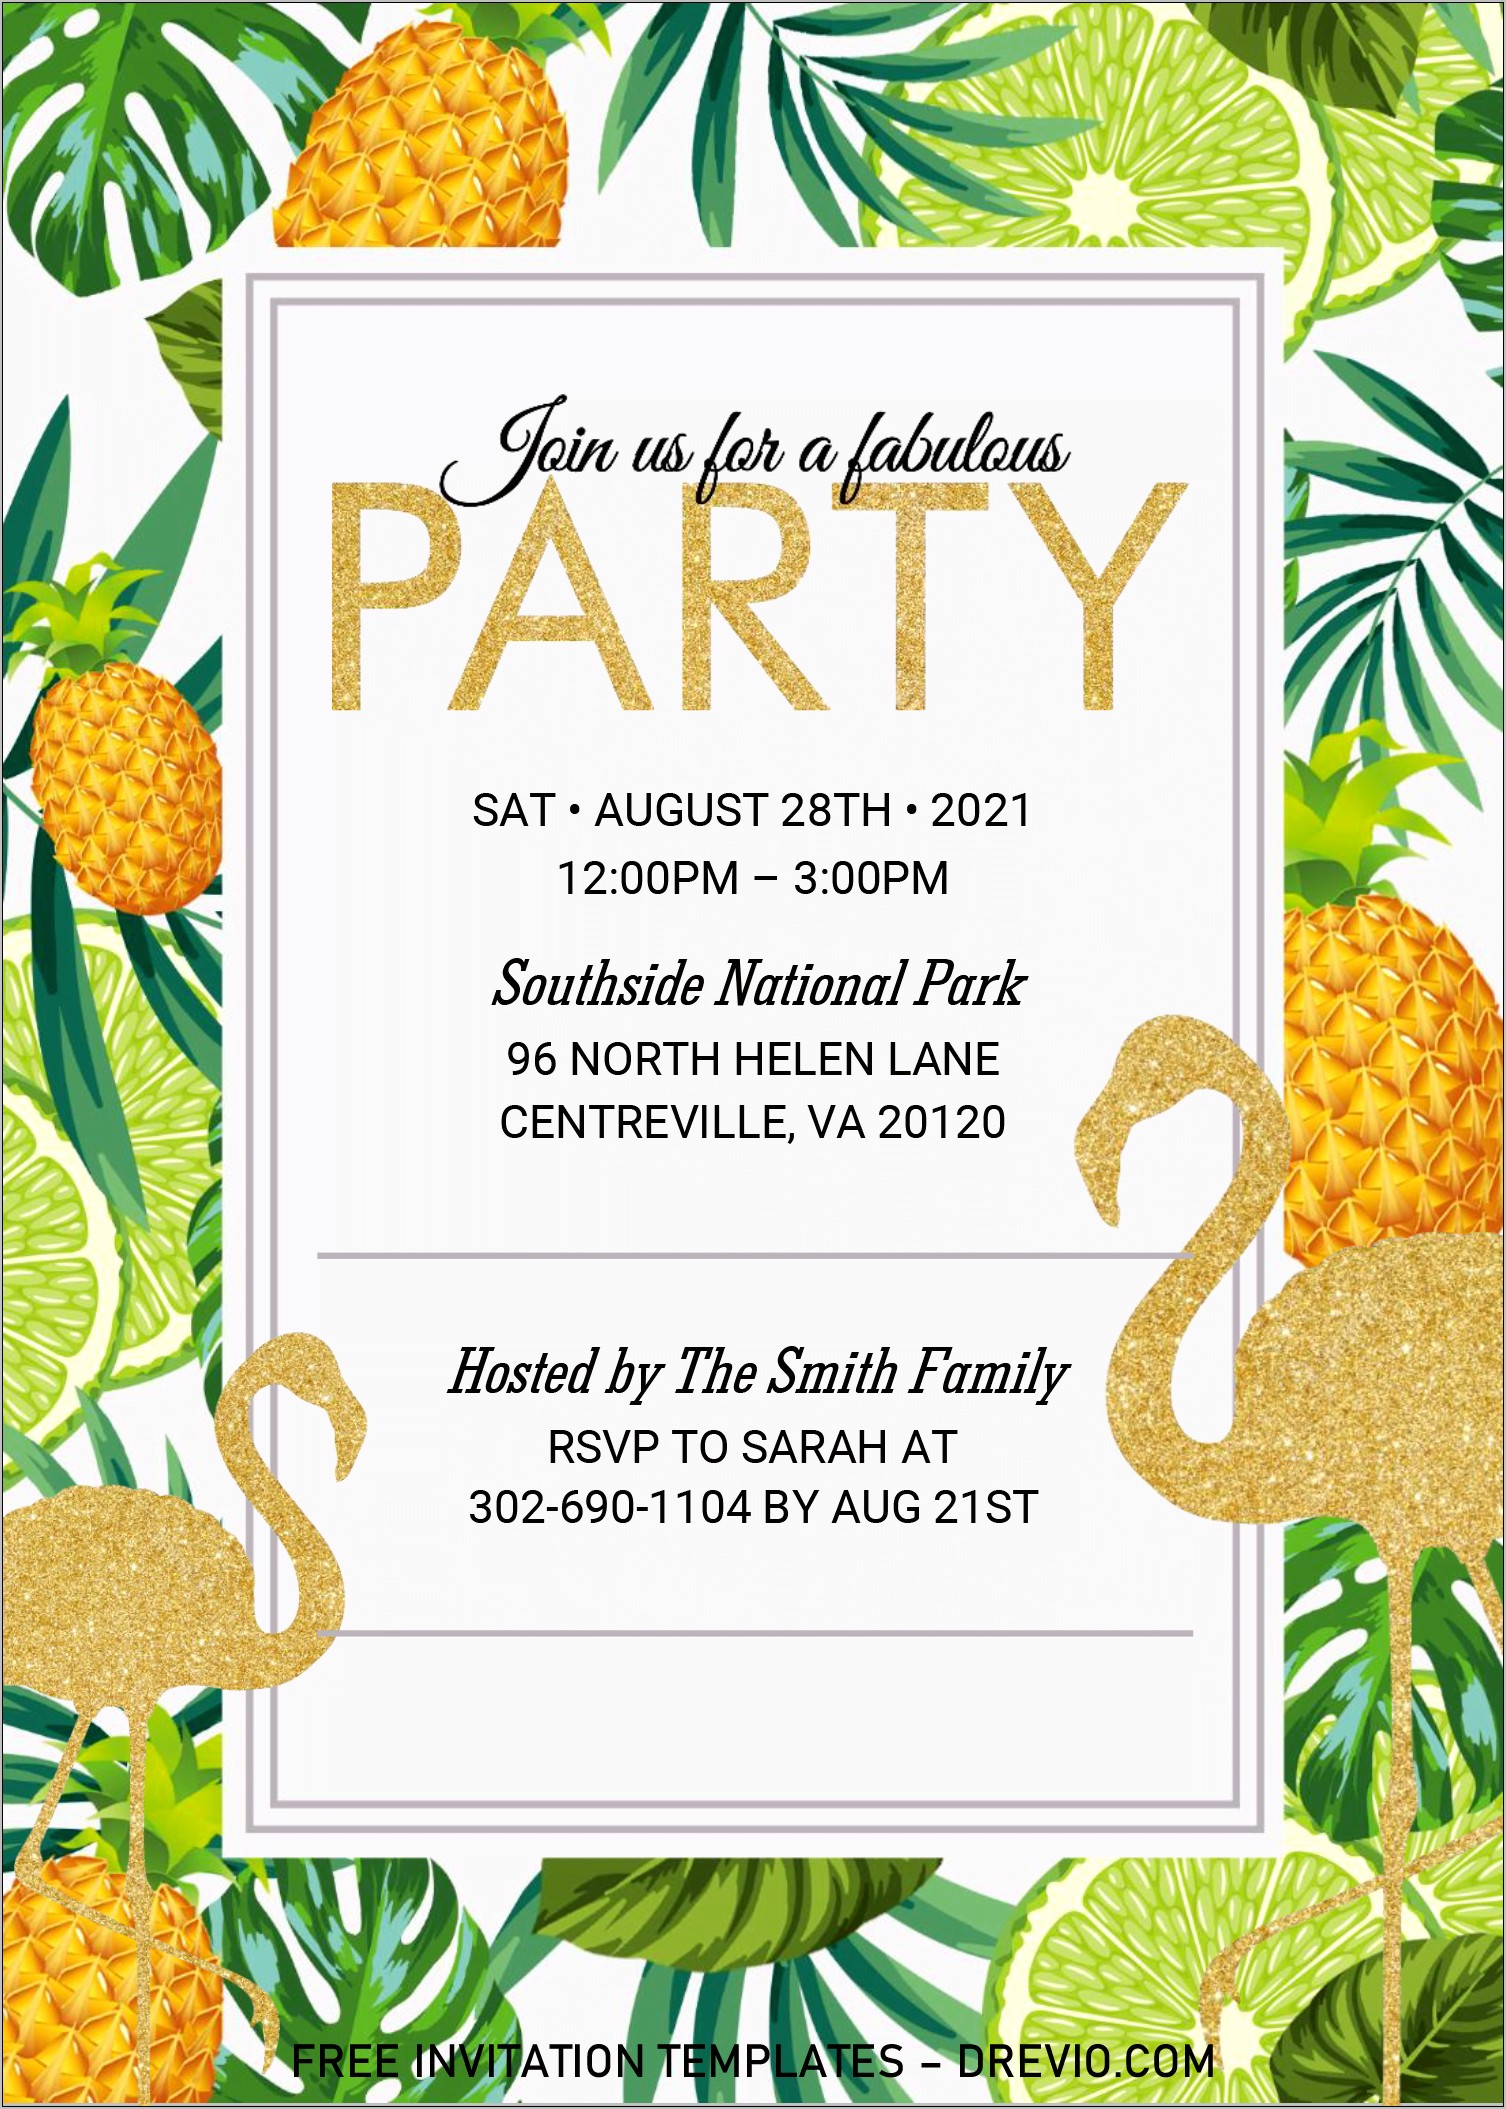 microsoft-word-party-invitation-templates-free-resume-example-gallery